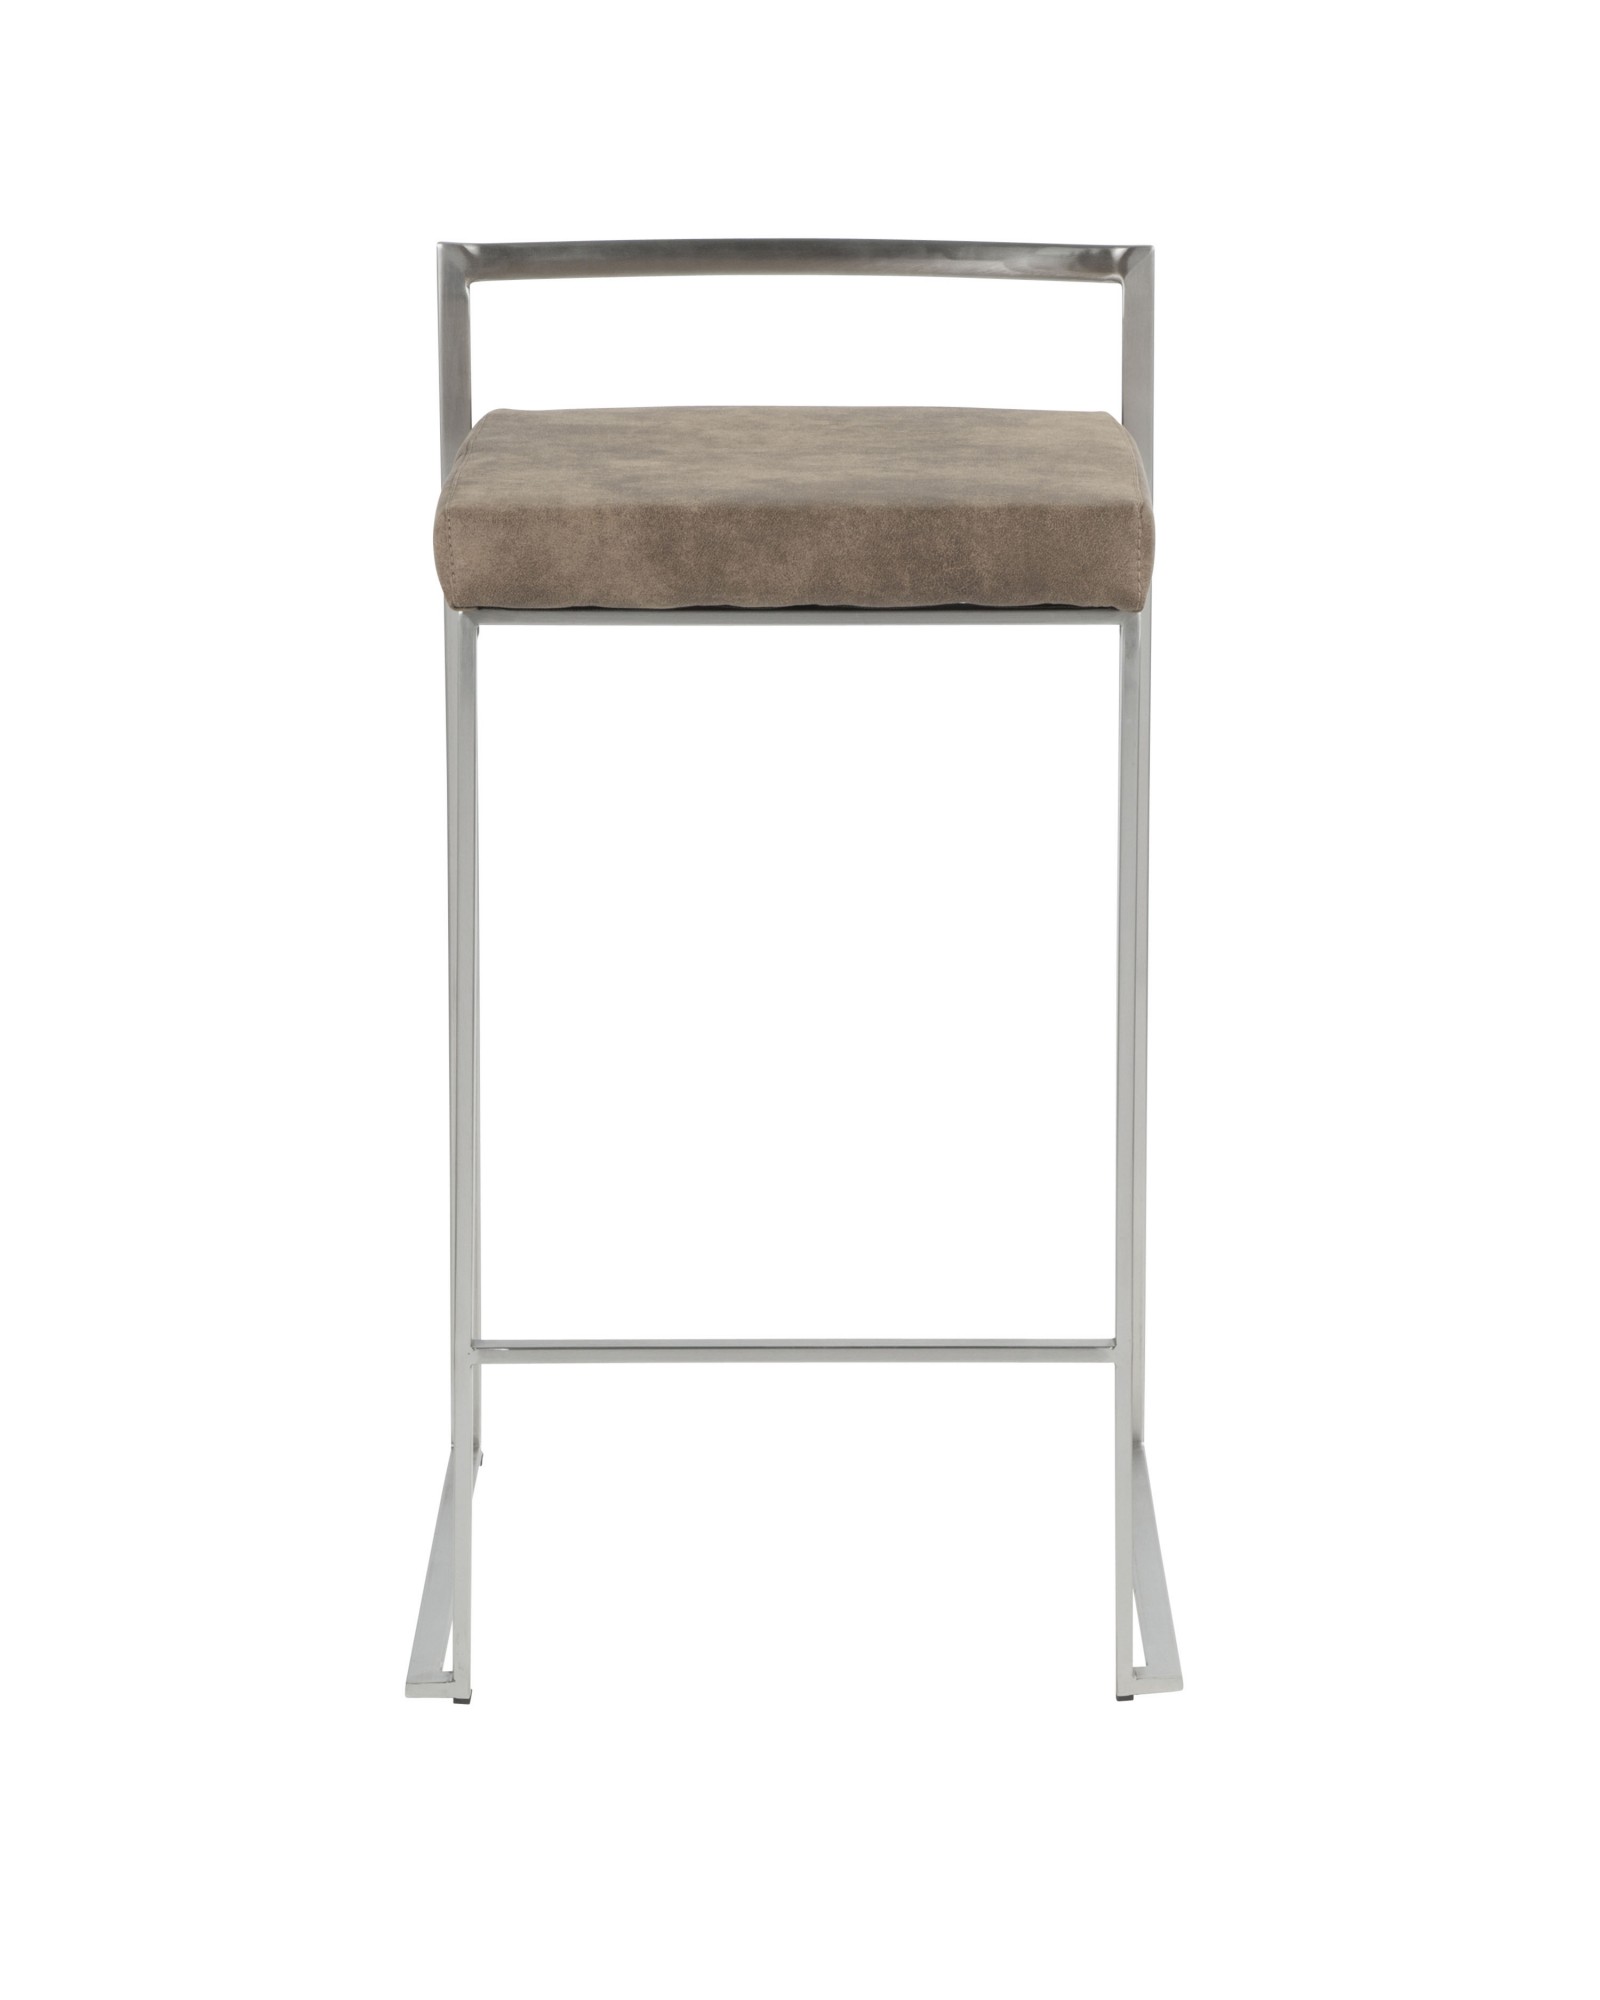 Fuji Contemporary Stackable Counter Stool in Stainless Steel with Brown Cowboy Fabric Cushion - Set of 2